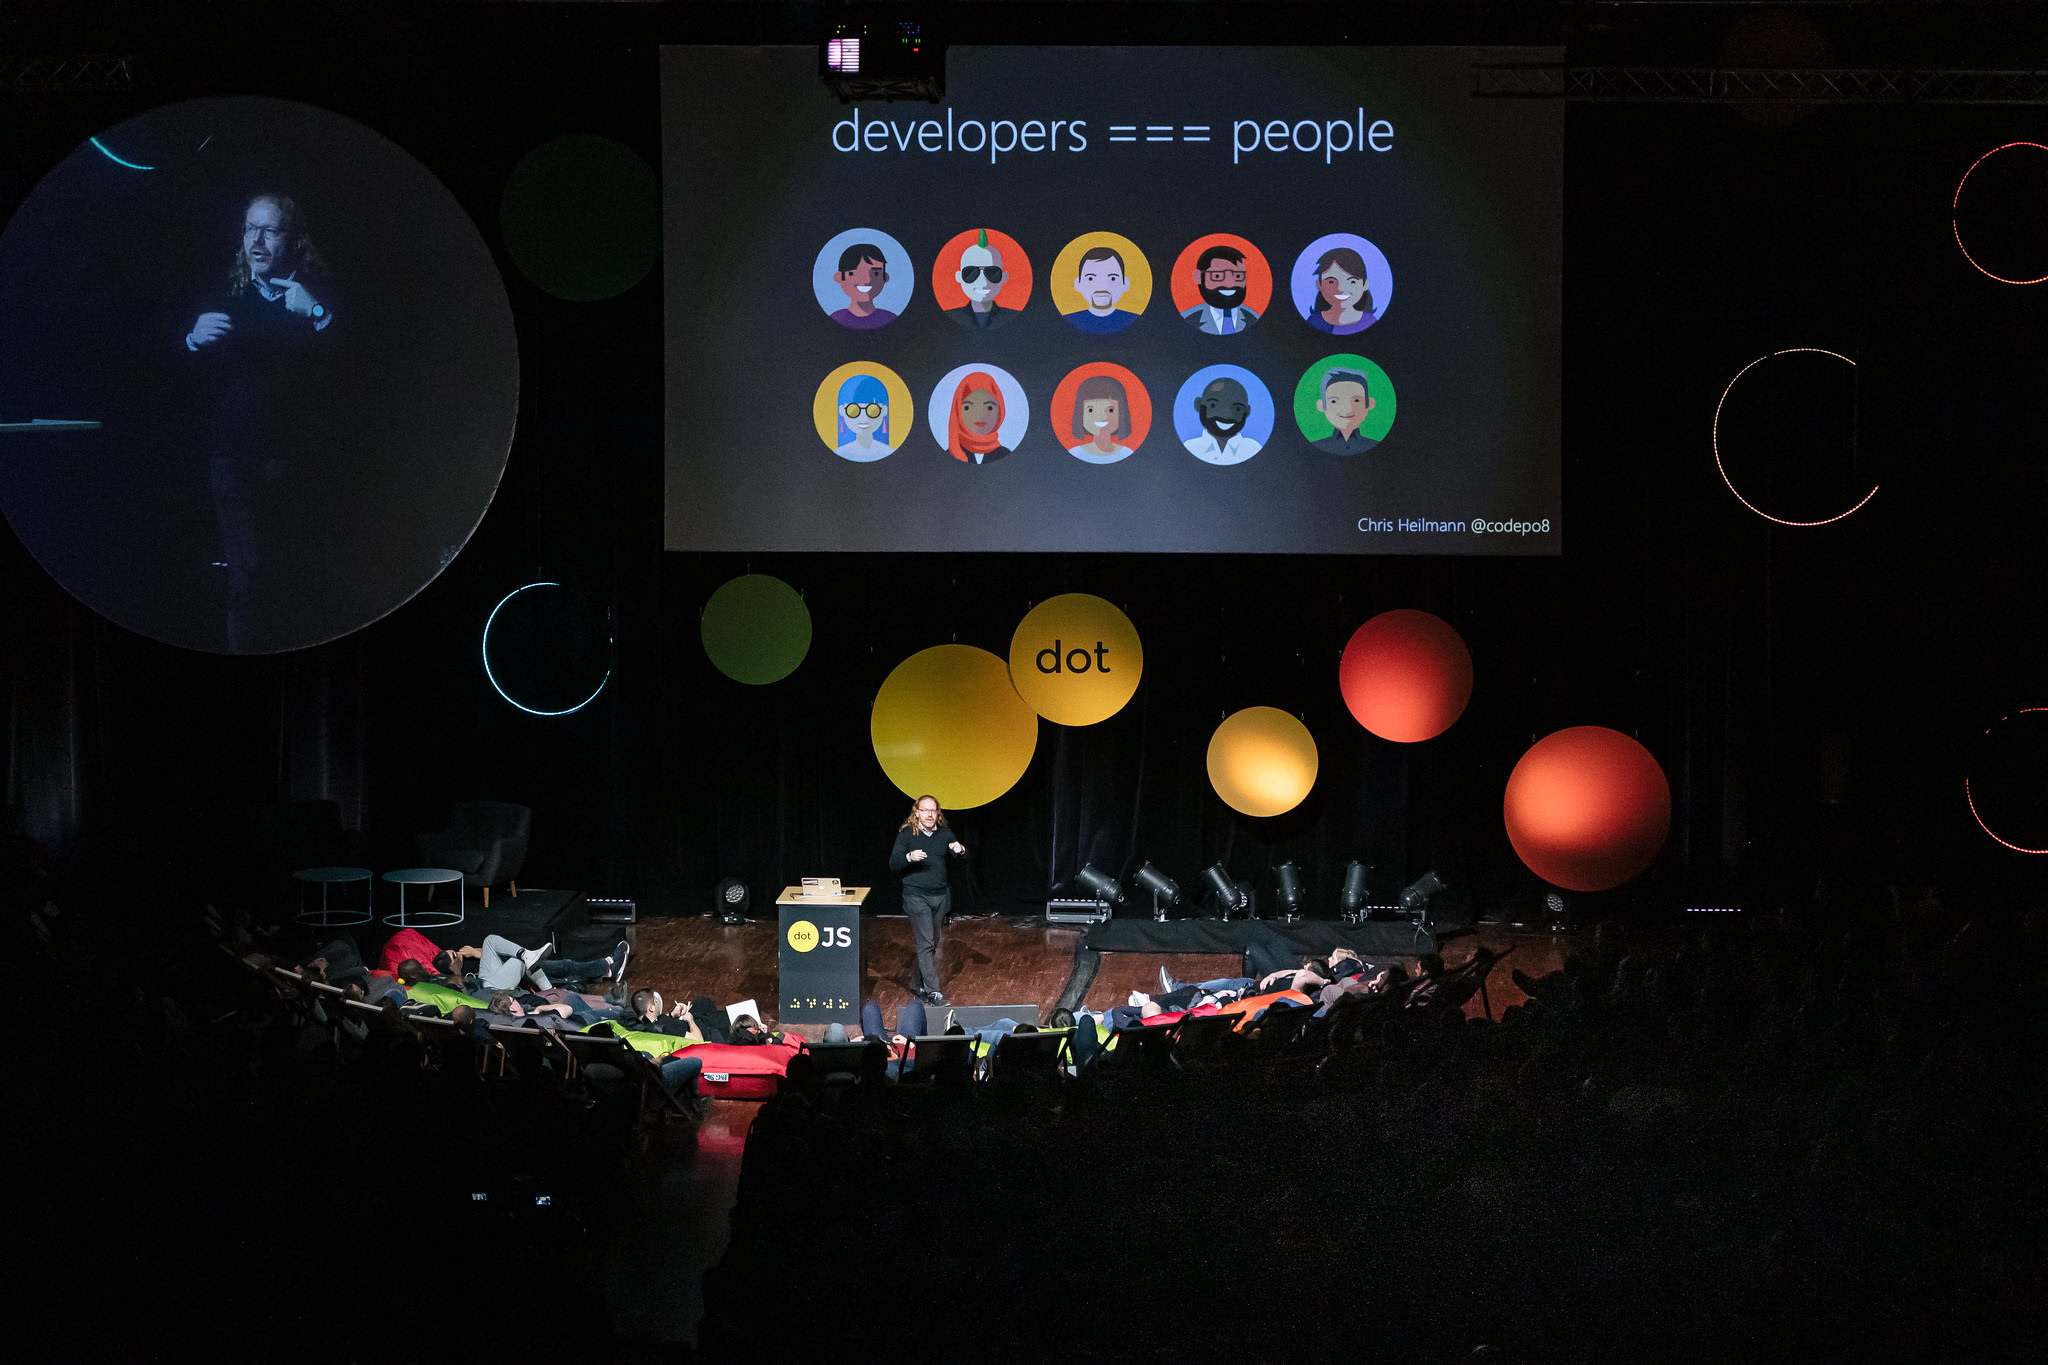 Chris Heilmann presenting at dotjs 2019 with a slide saying developers are people